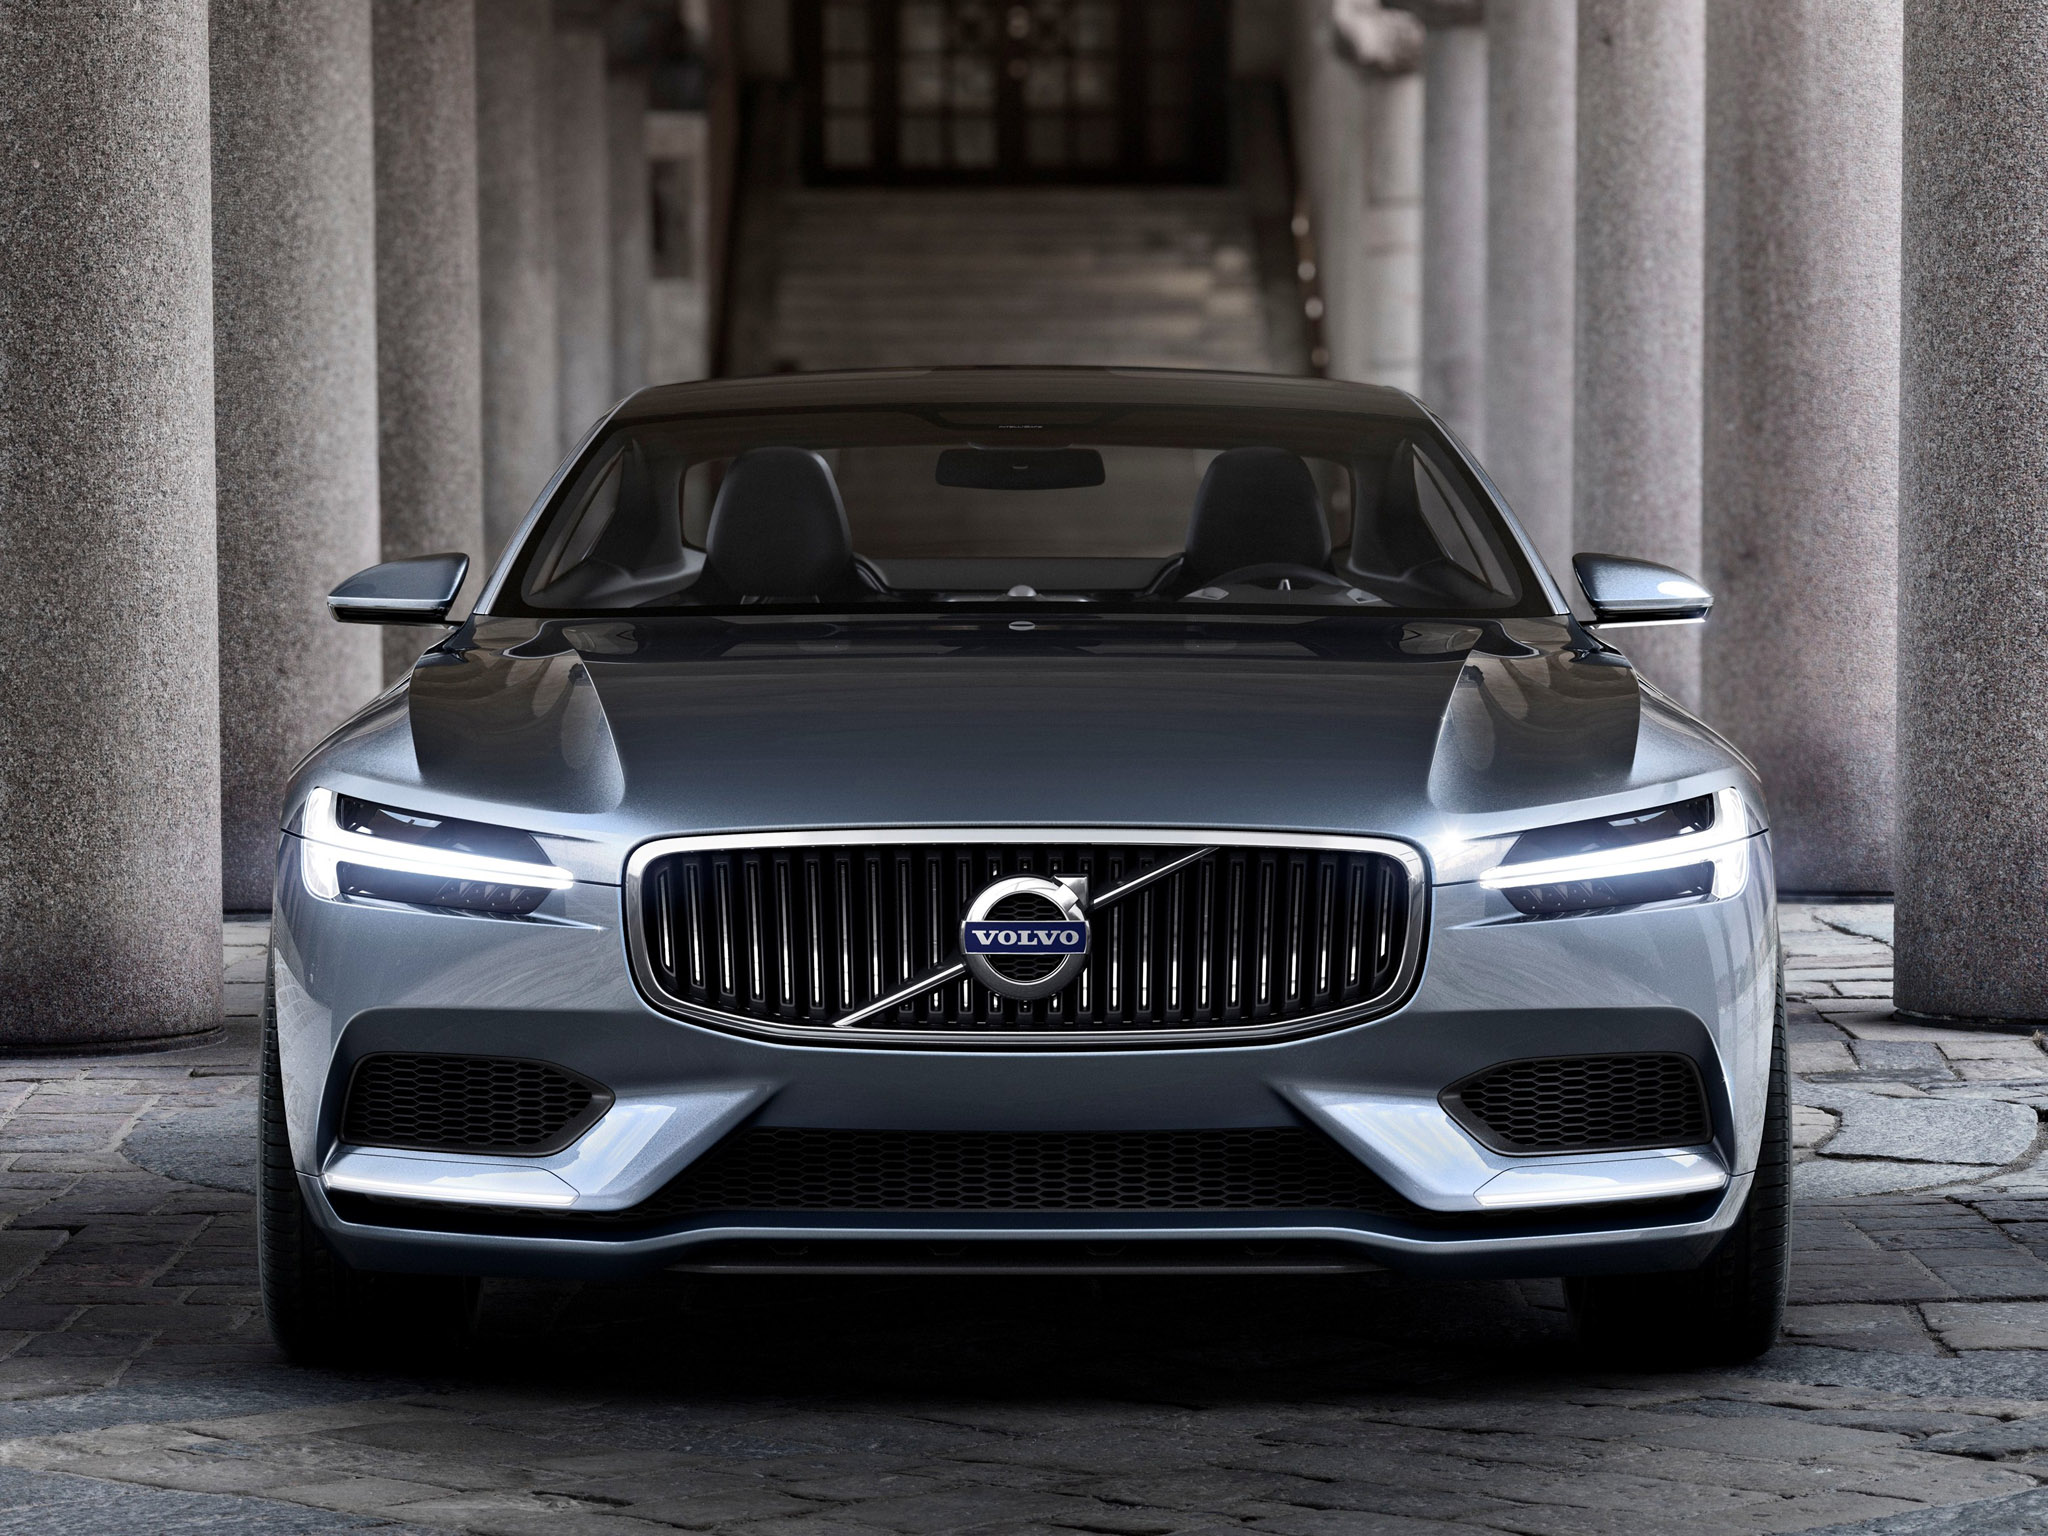 2013 Volvo Coupe Concept HD wallpapers, Desktop wallpaper - most viewed